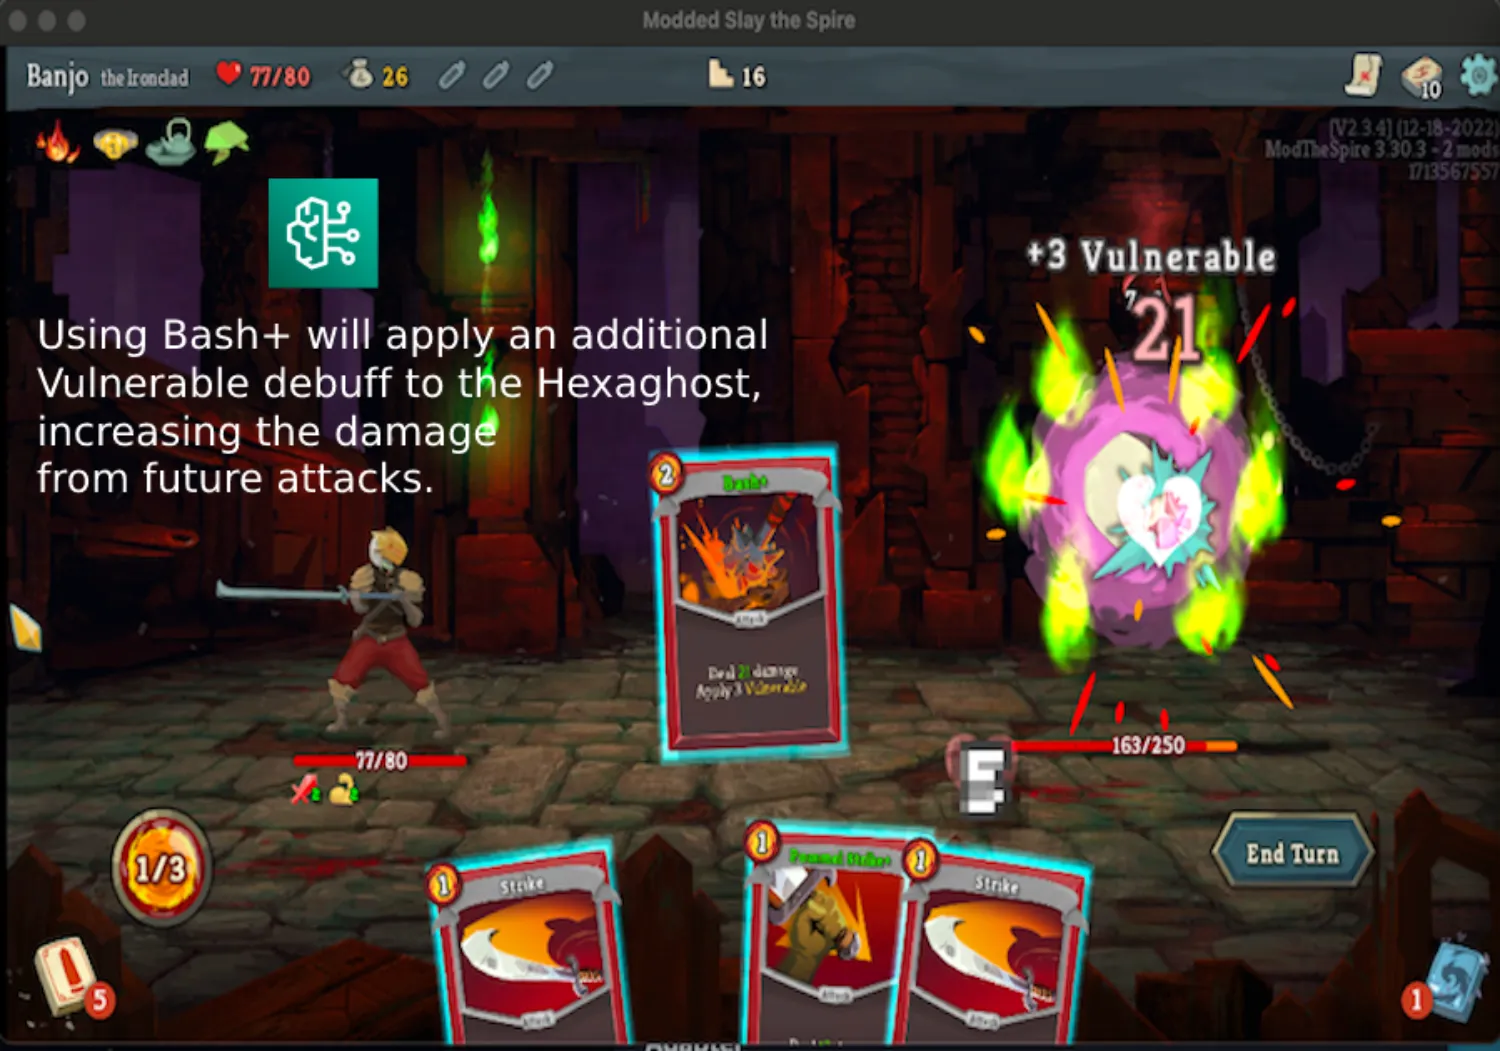 I Built an LLM Bot in 3 hours to Conquer Slay the Spire